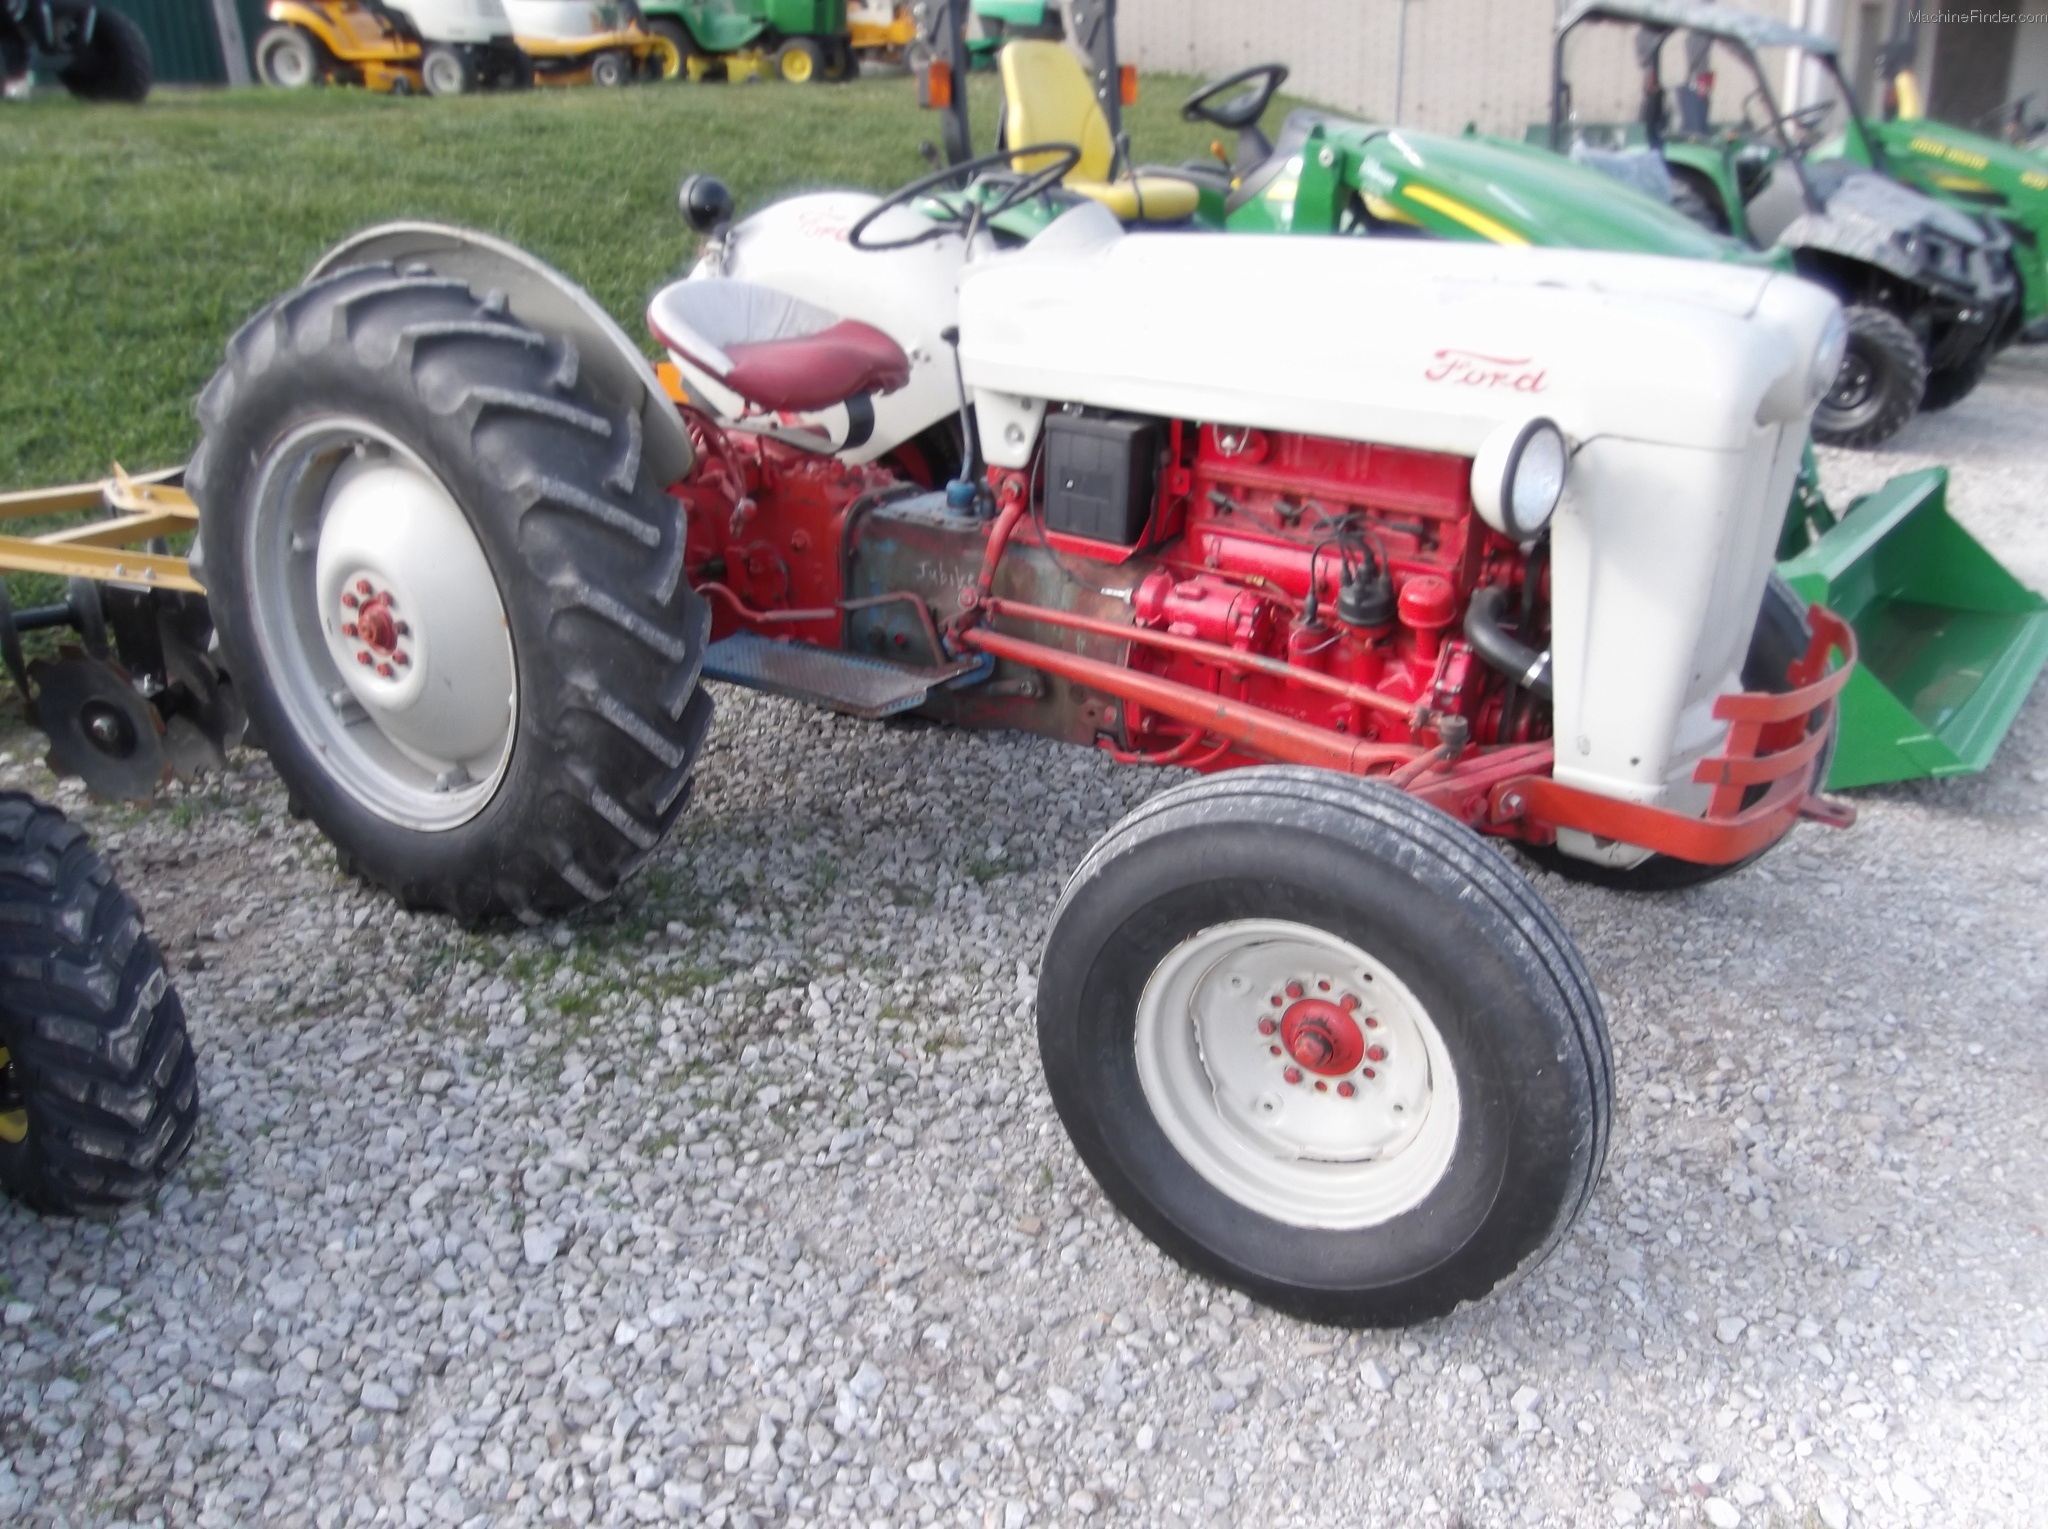 1954 Ford golden jubilee naa tractor #3